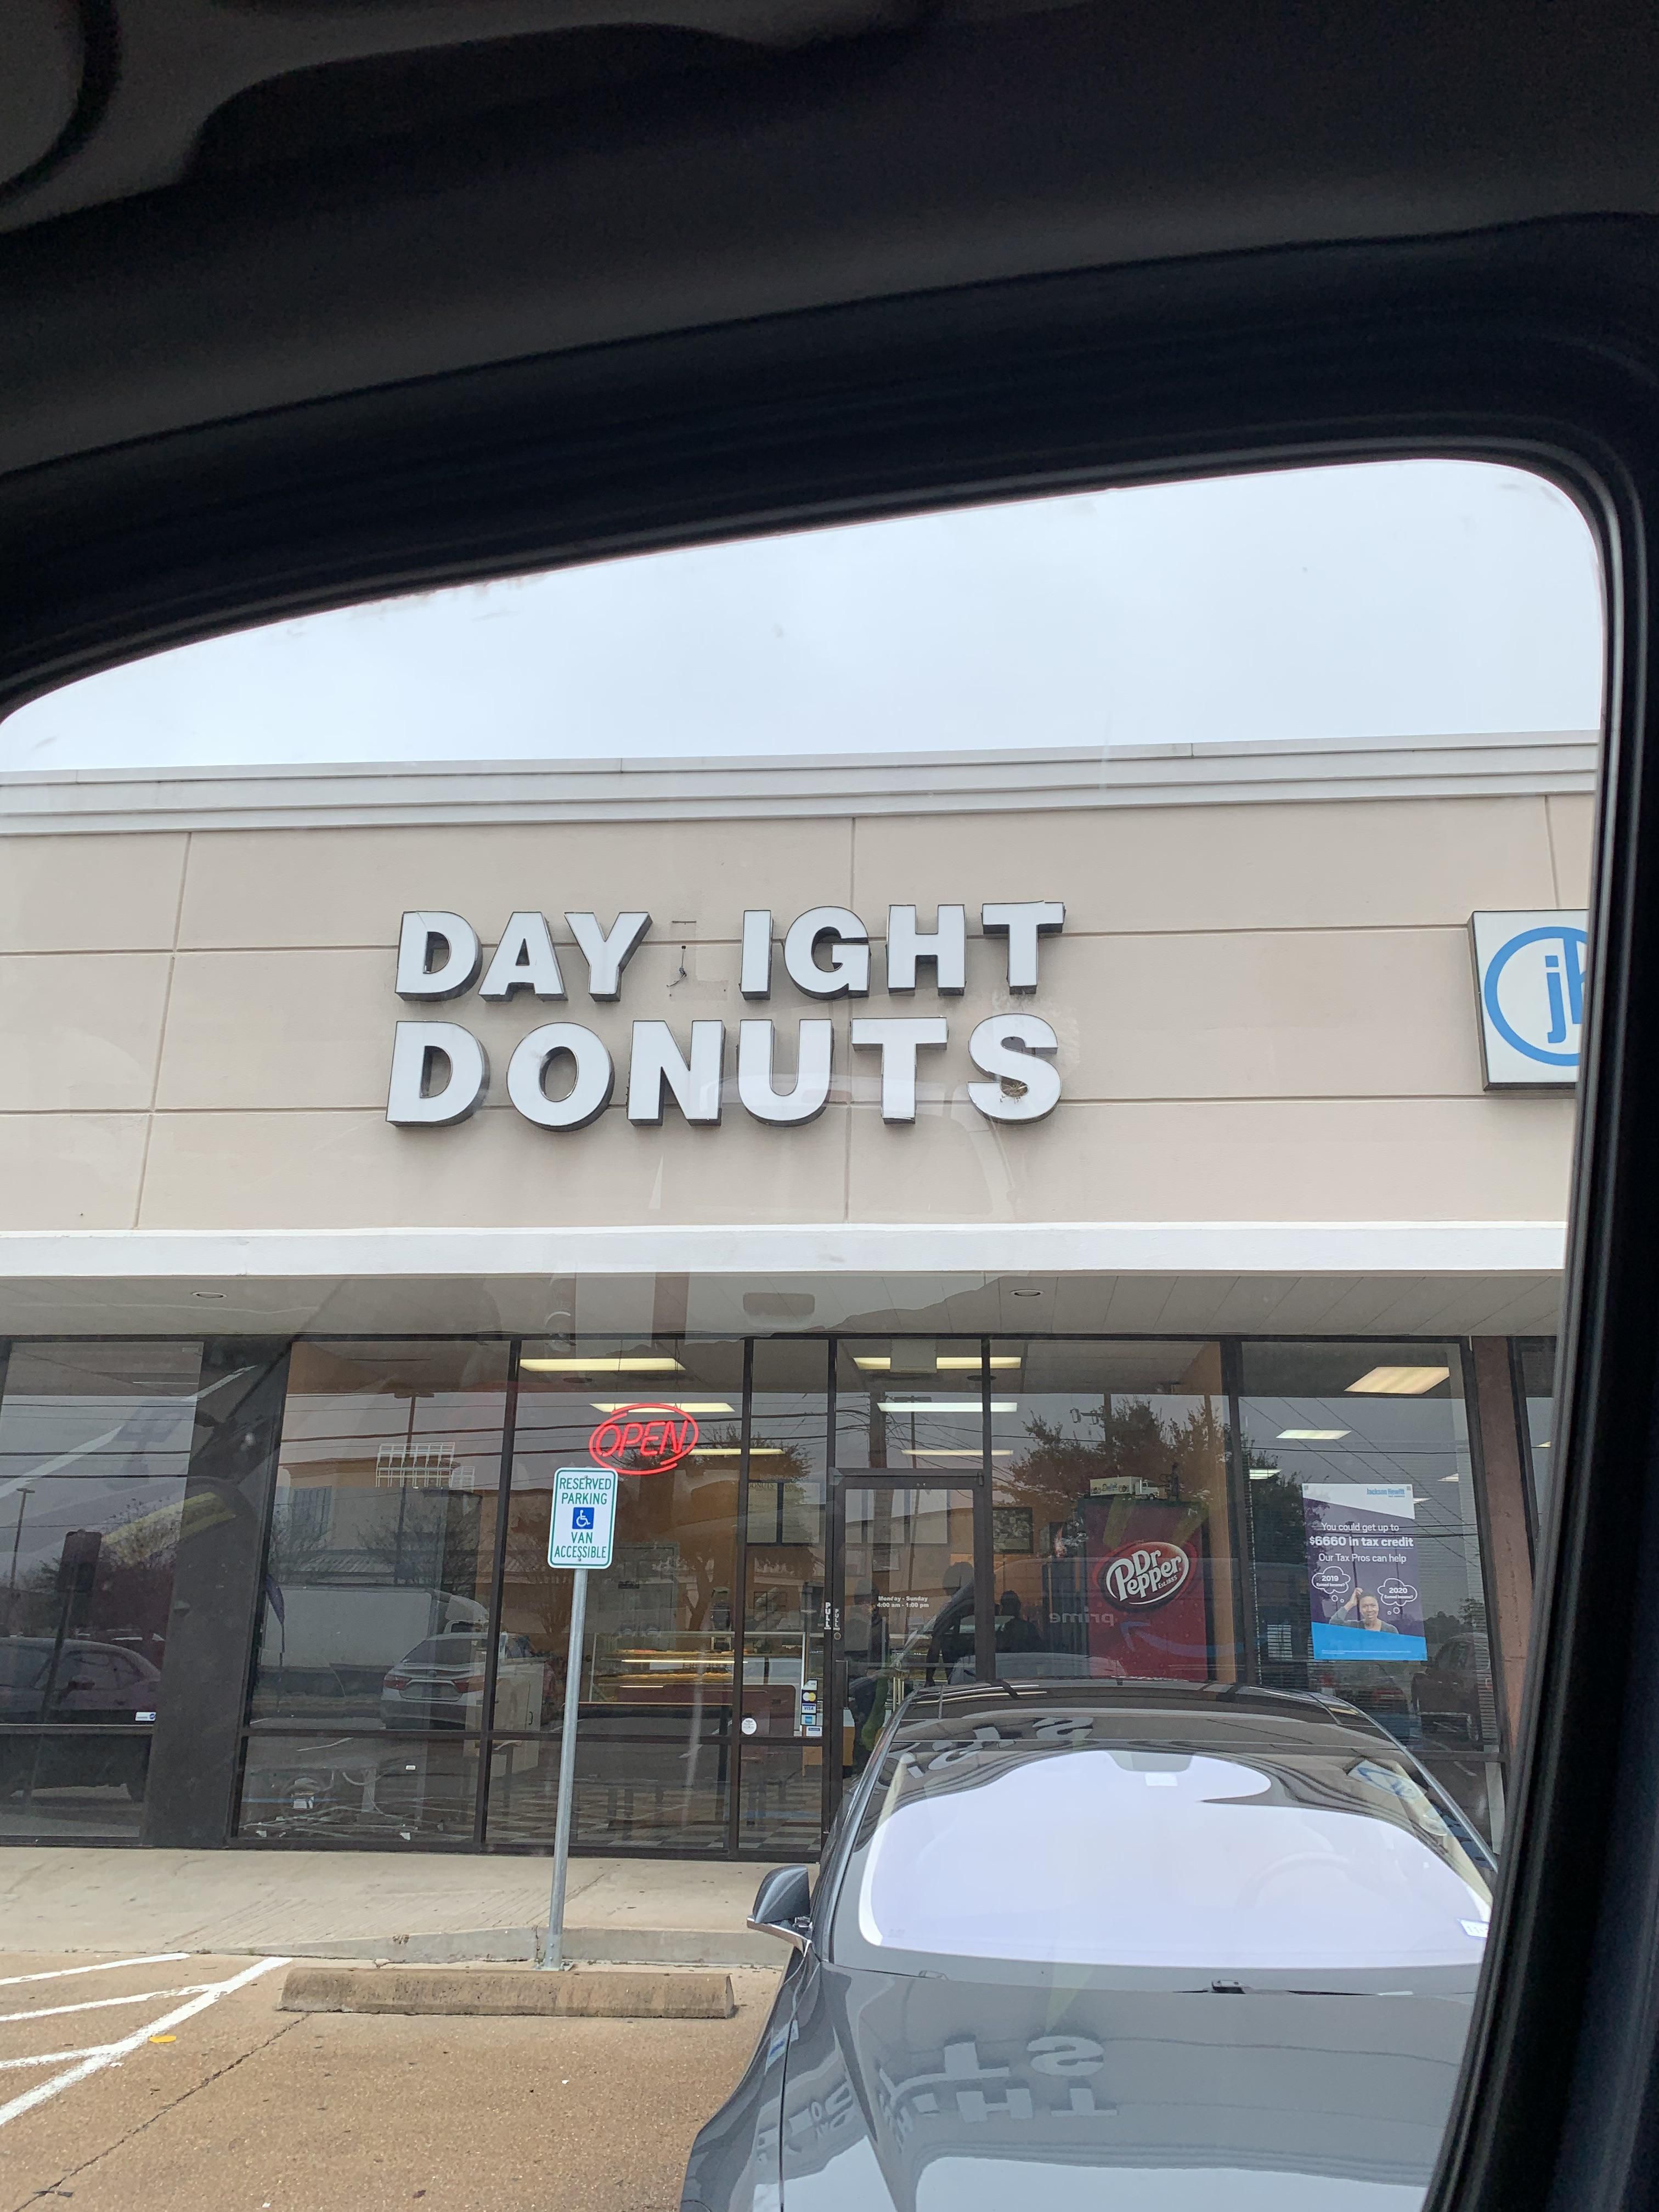 Are the donuts good though?